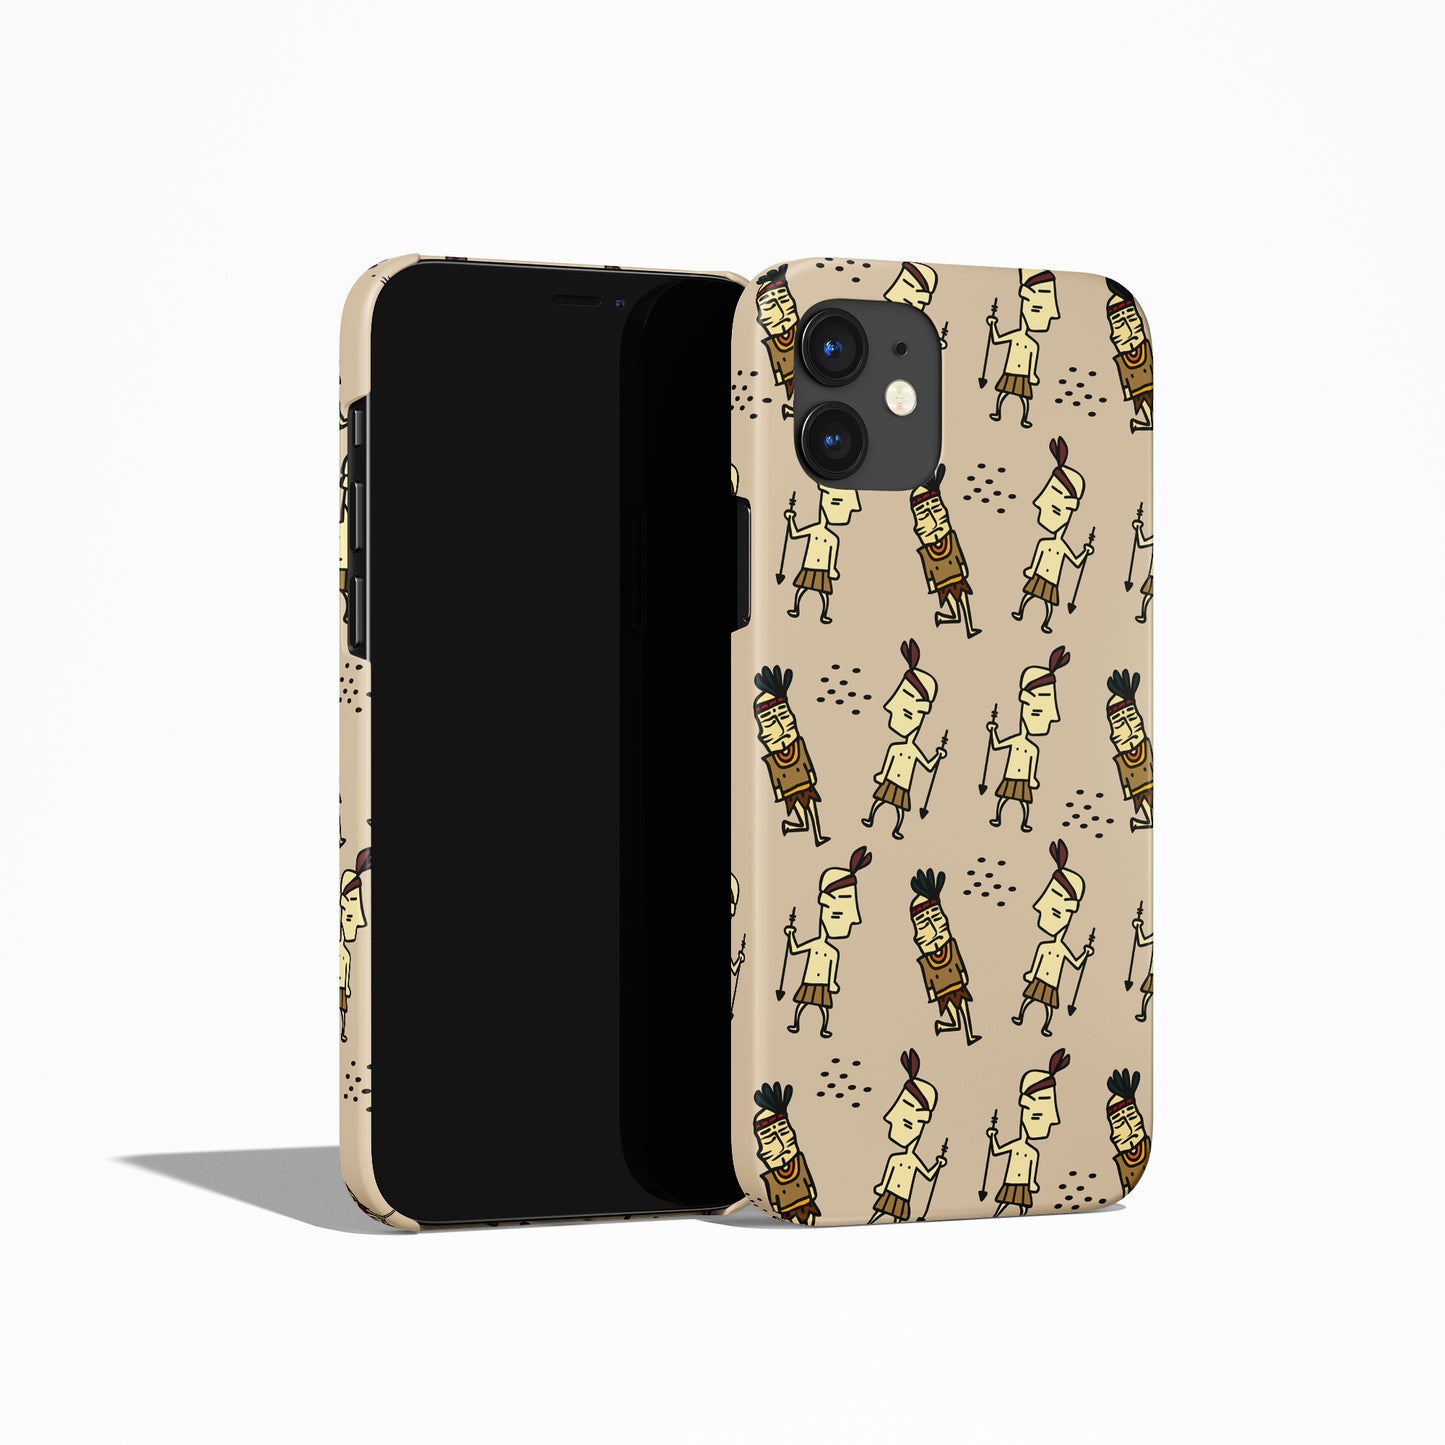 Funny Indians Cartoon Inspired iPhone Case